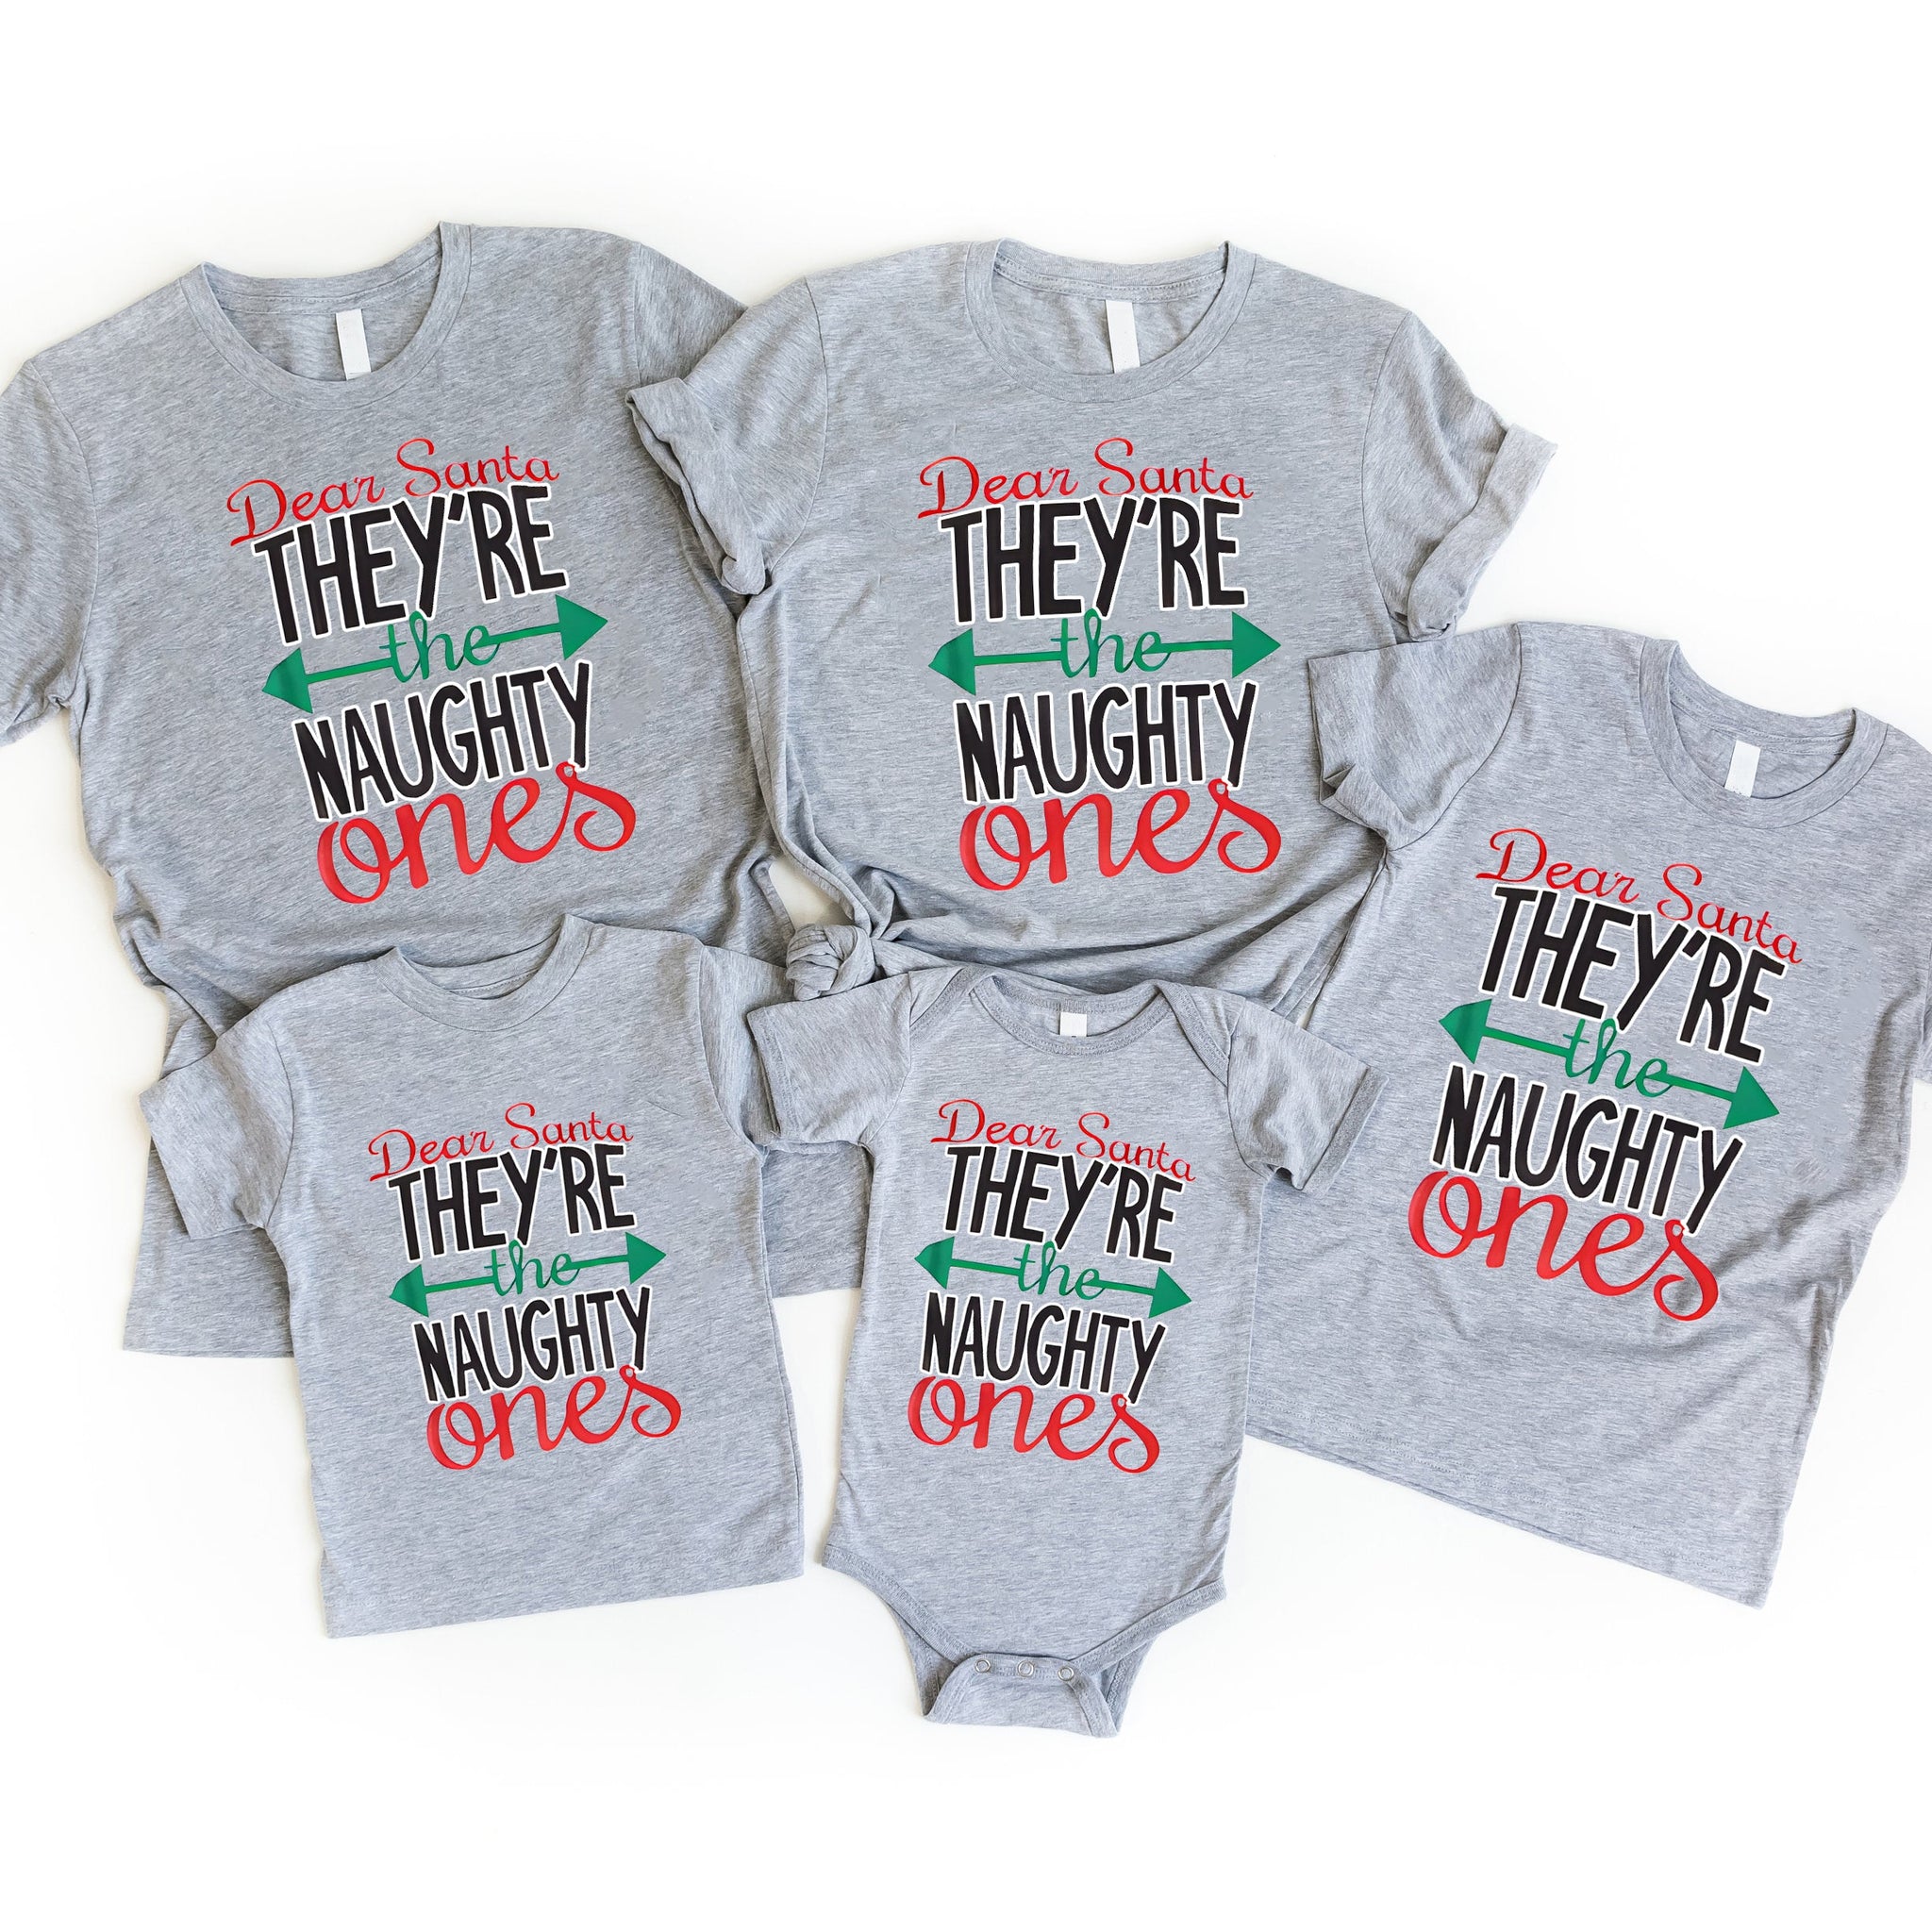 'Dear Santa They're The Naughty Ones' Letter Pattern Family Christmas Matching Pajamas Tops Cute Gray Short Sleeve T-shirt With Dog Bandana